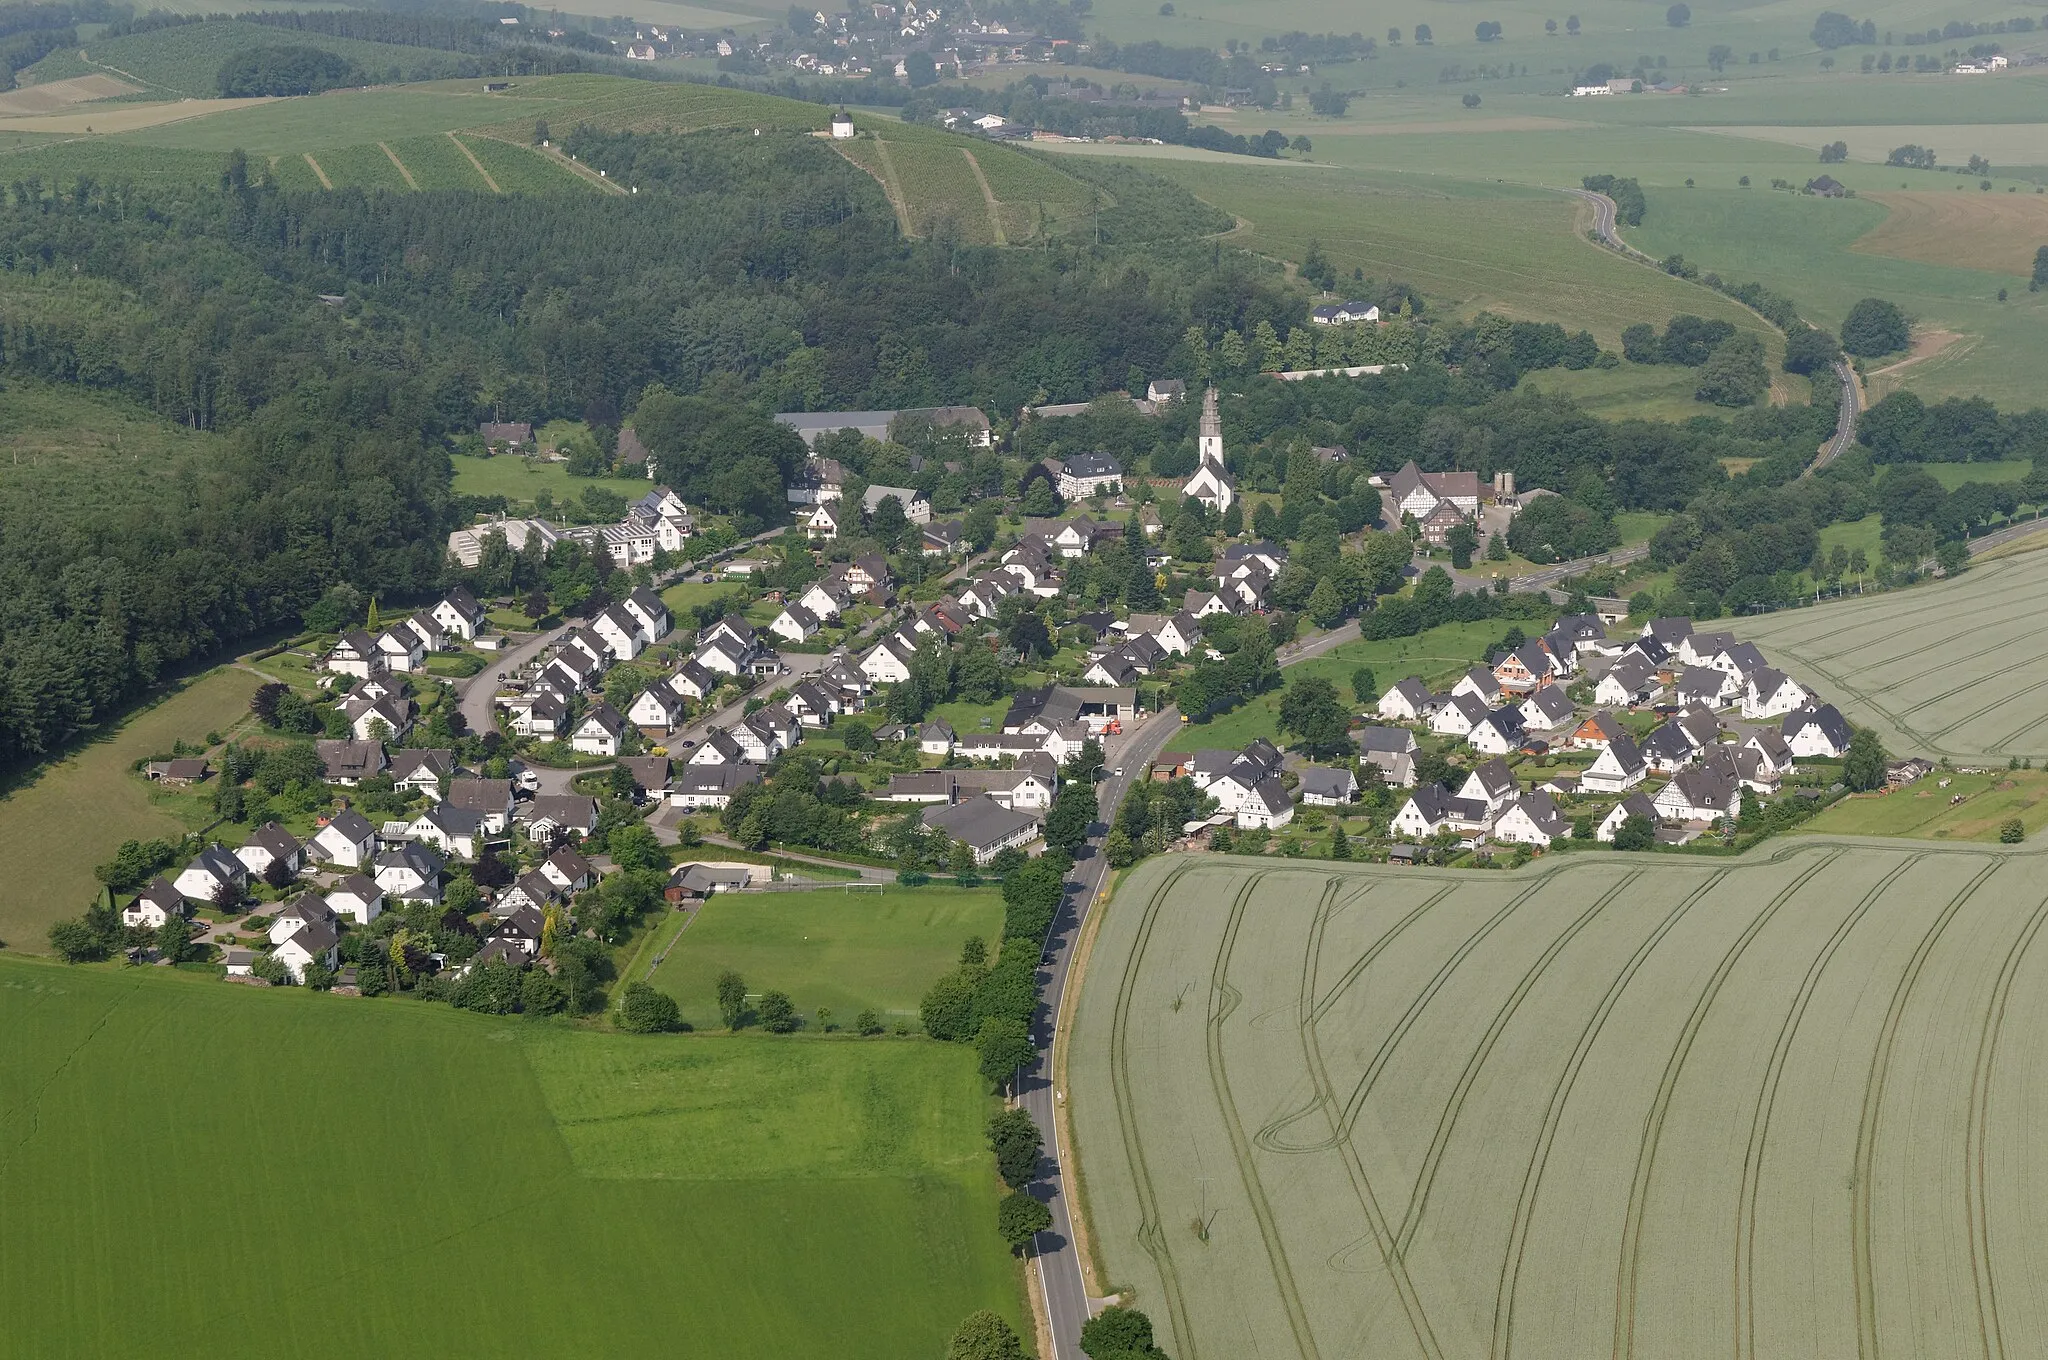 Photo showing: Fotoflug Sauerland-Ost: Schmallenberg-Wormbach, Blick Richtung Westen

The production, editing or release of this file was supported by the Community-Budget of Wikimedia Deutschland.
To see other files made with the support of Wikimedia Deutschland, please see the category Supported by Wikimedia Deutschland.
العربية ∙ বাংলা ∙ Deutsch ∙ English ∙ Esperanto ∙ français ∙ magyar ∙ Bahasa Indonesia ∙ italiano ∙ 日本語 ∙ македонски ∙ മലയാളം ∙ Bahasa Melayu ∙ Nederlands ∙ português ∙ русский ∙ svenska ∙ українська ∙ +/−